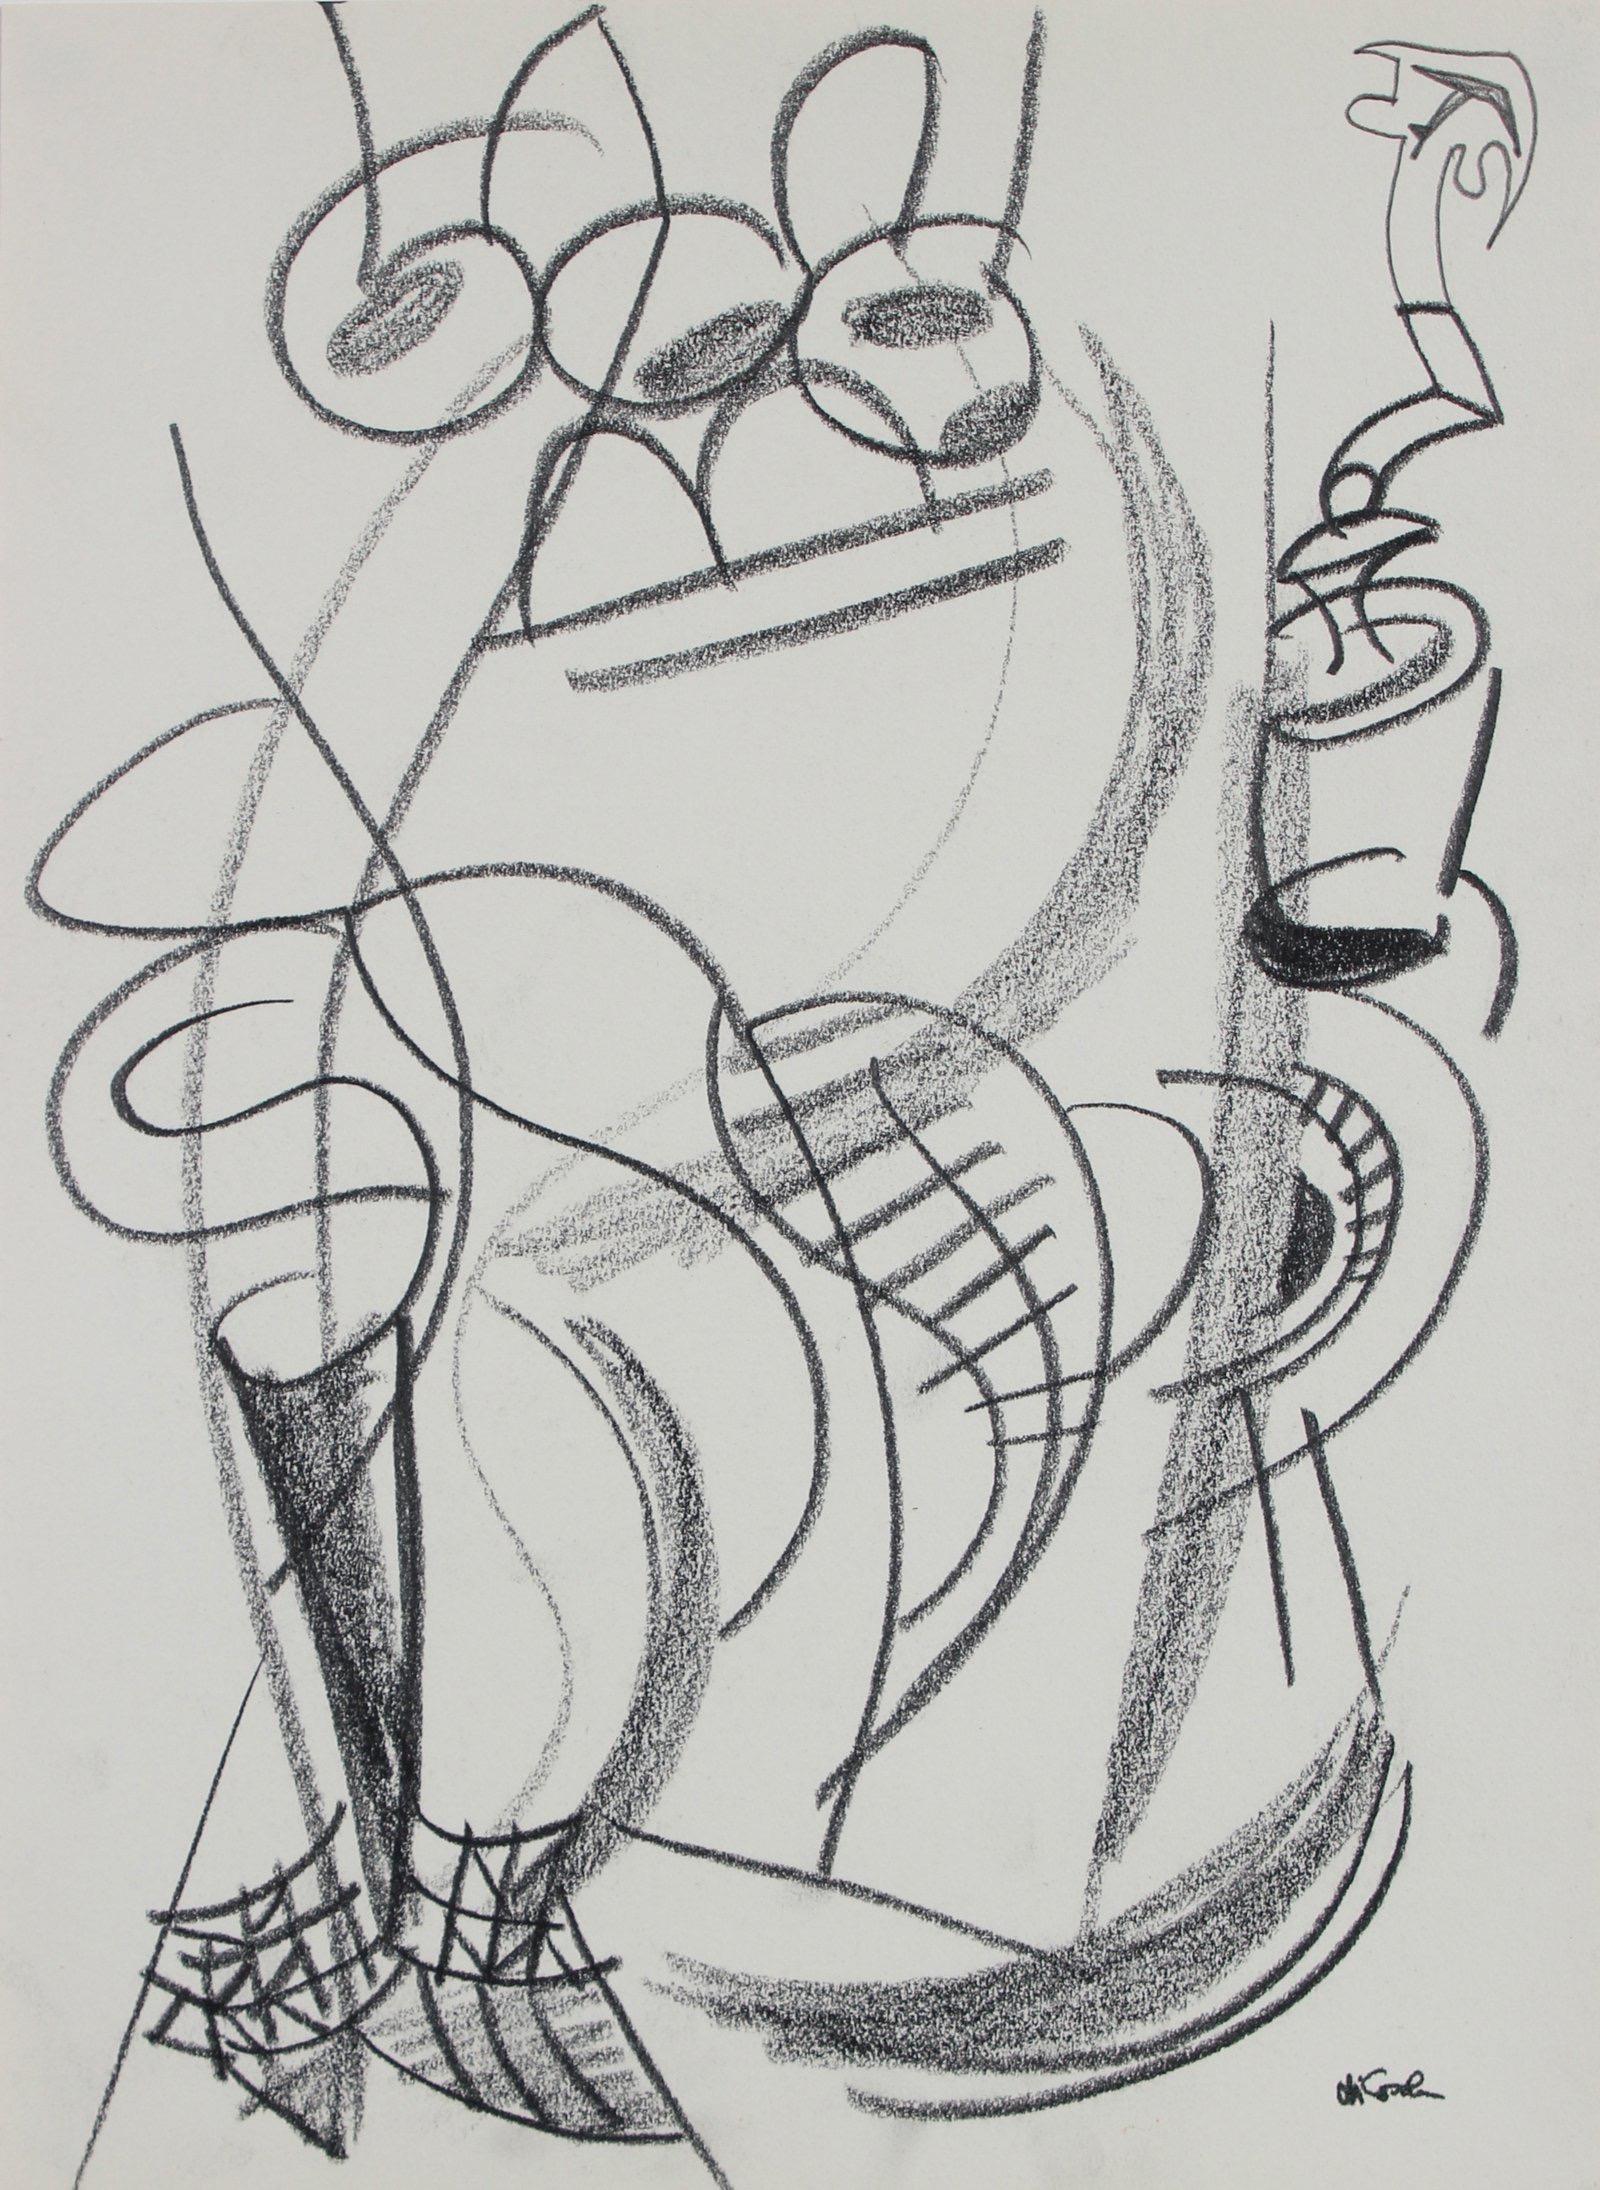 Michael di Cosola Abstract Drawing - Monochromatic Deconstructed Sketch with Shading Late 20th Century Graphite